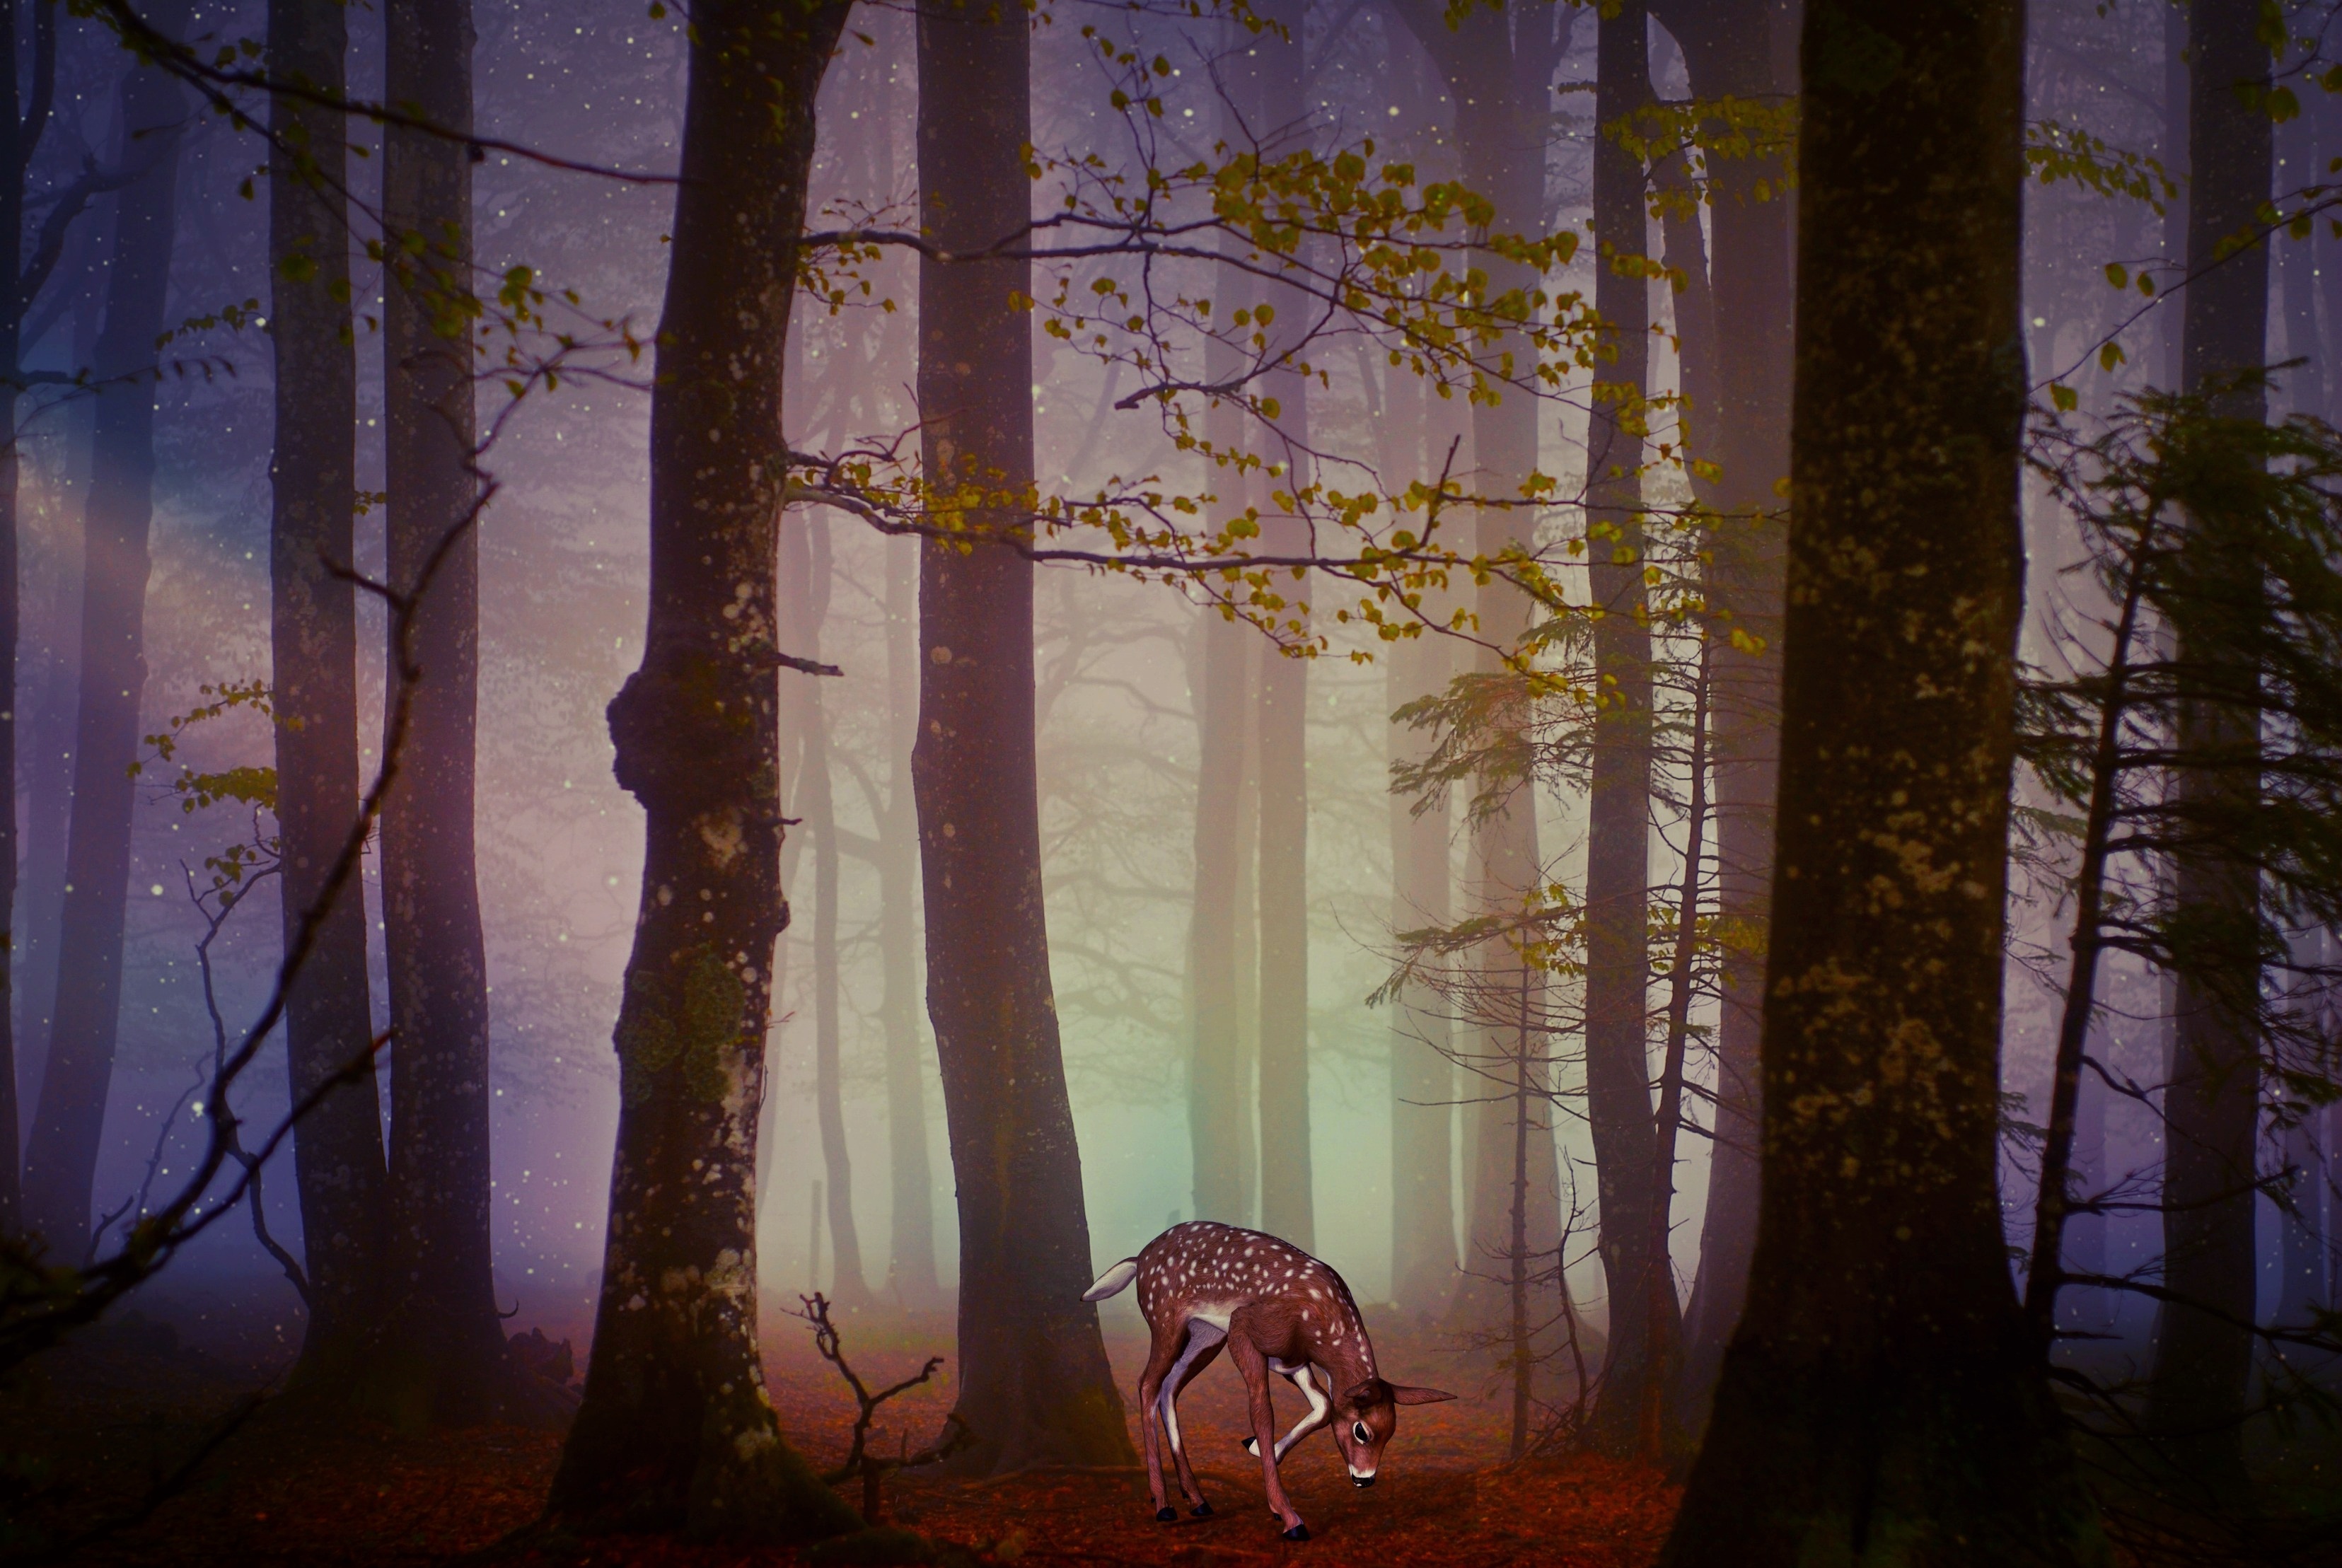 A Deer in a misty forest